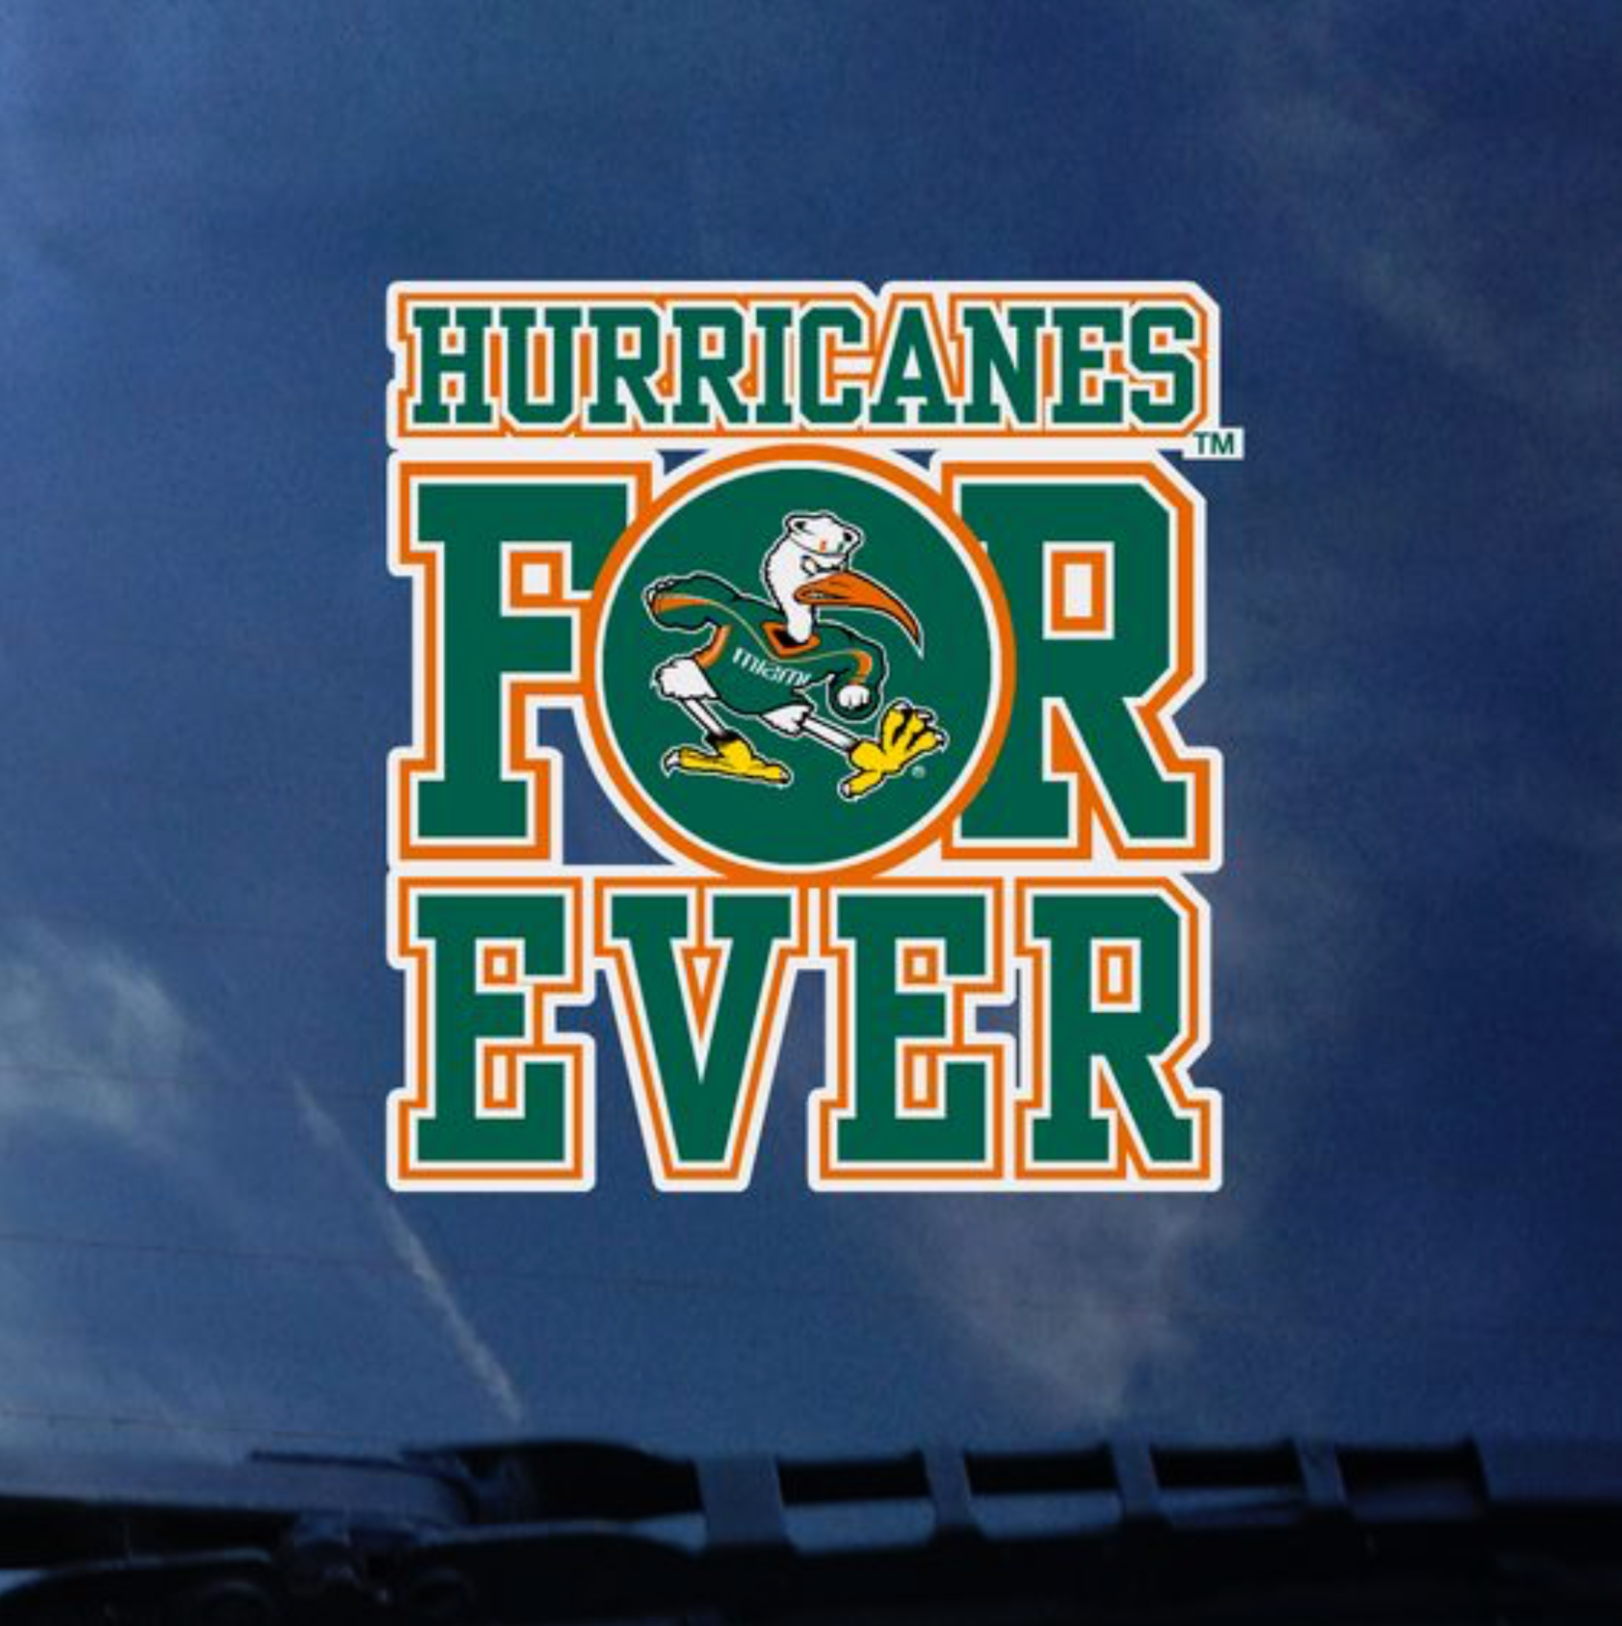 Miami Hurricanes Hurricanes Forever with Sebastian Decal - 3 1/2" x 4"